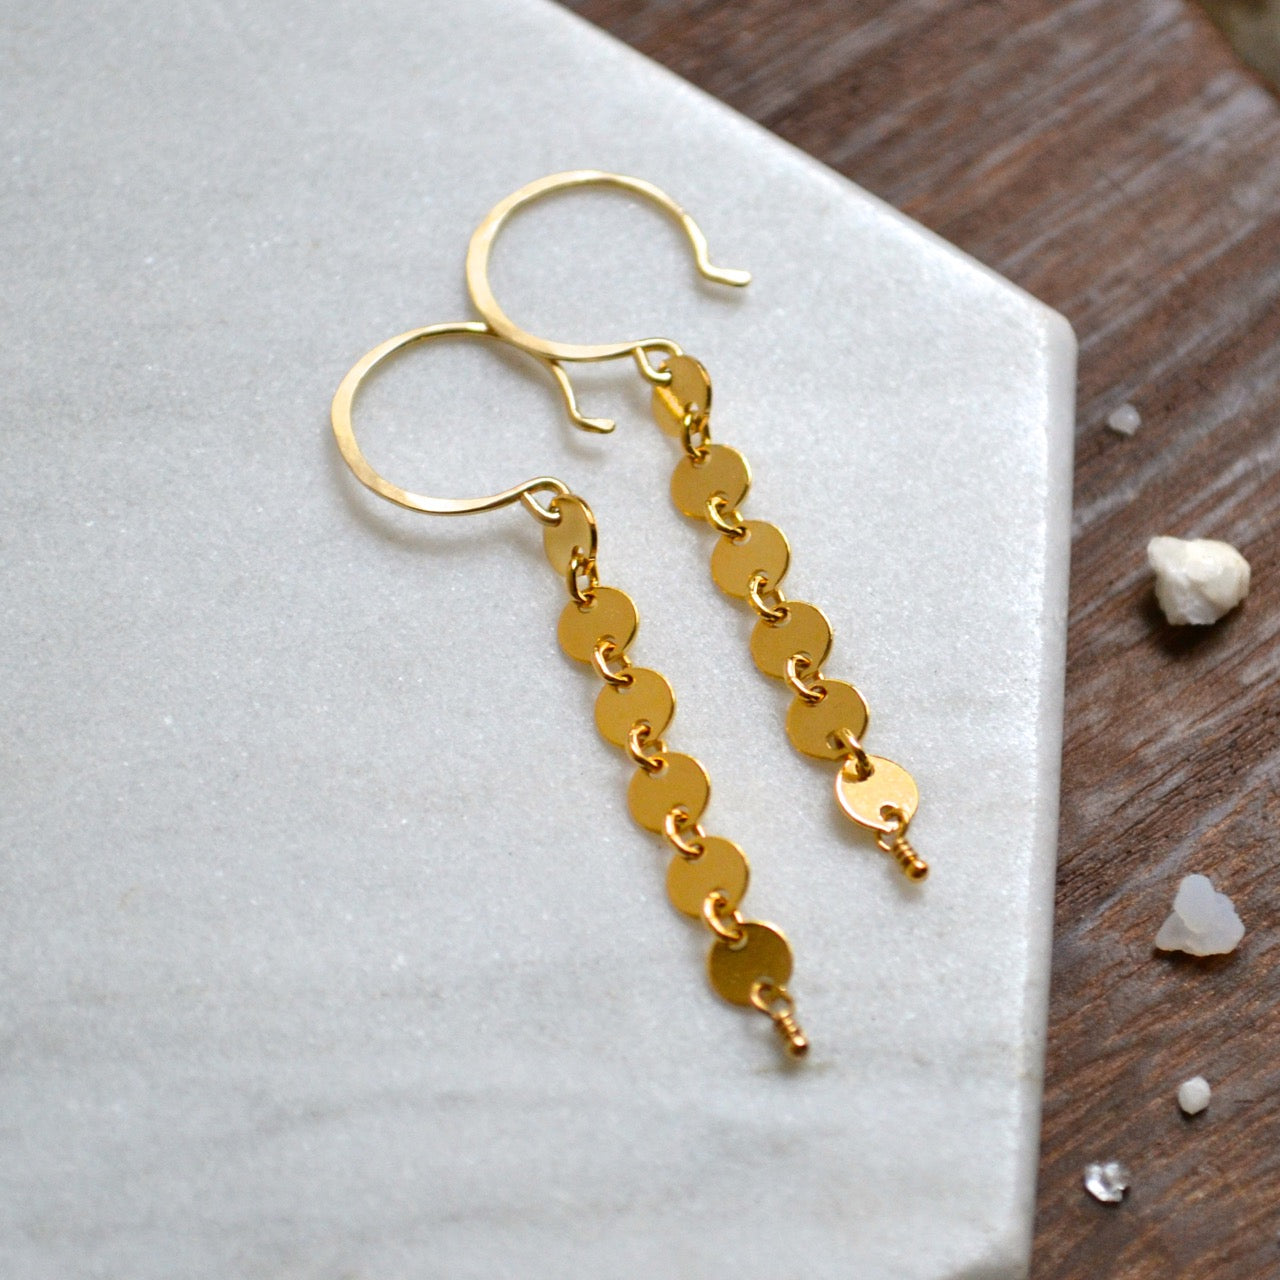 pieces of eight earrings gold filled dangle earring handmade circle chain ear rings simple jewelry sustainable earrings